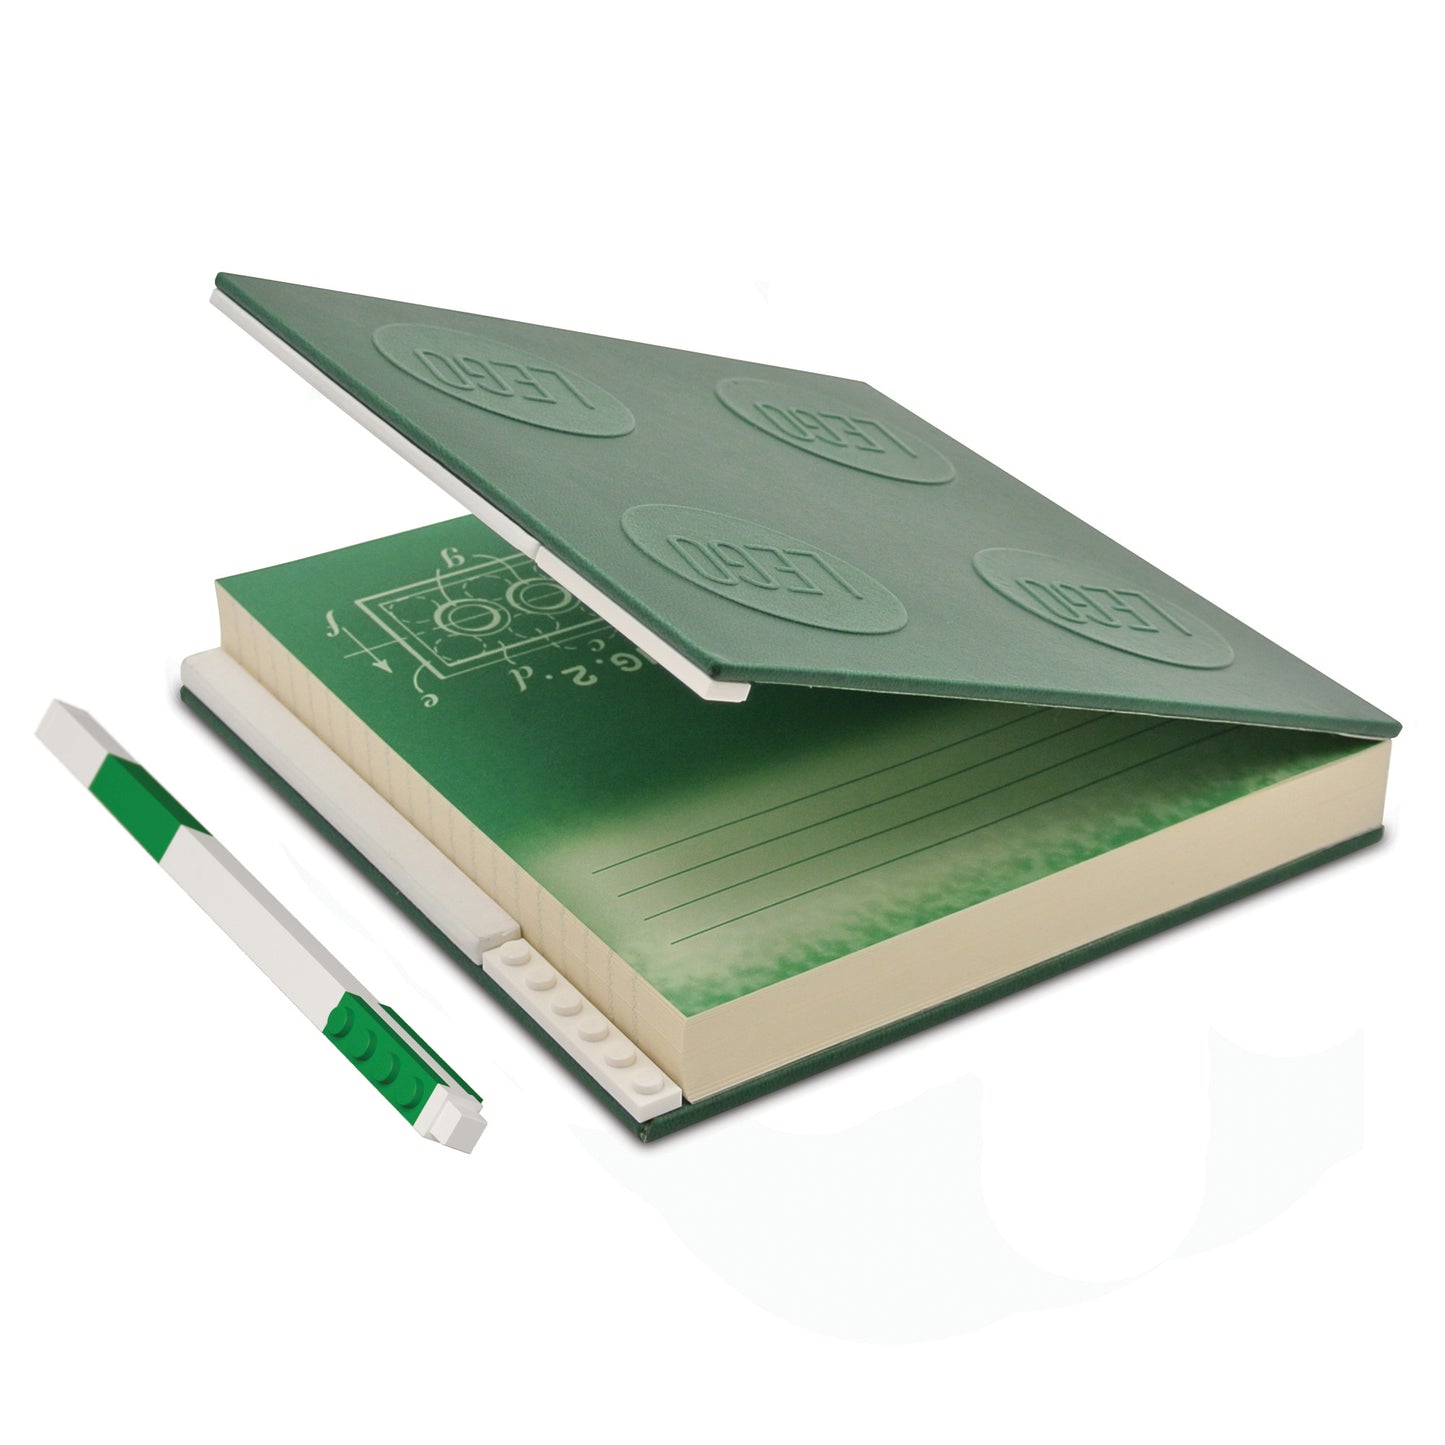 IQ LEGO® 2.0 Stationery Locking Notebook with Color-Matched Gel Pen - Green (52443)